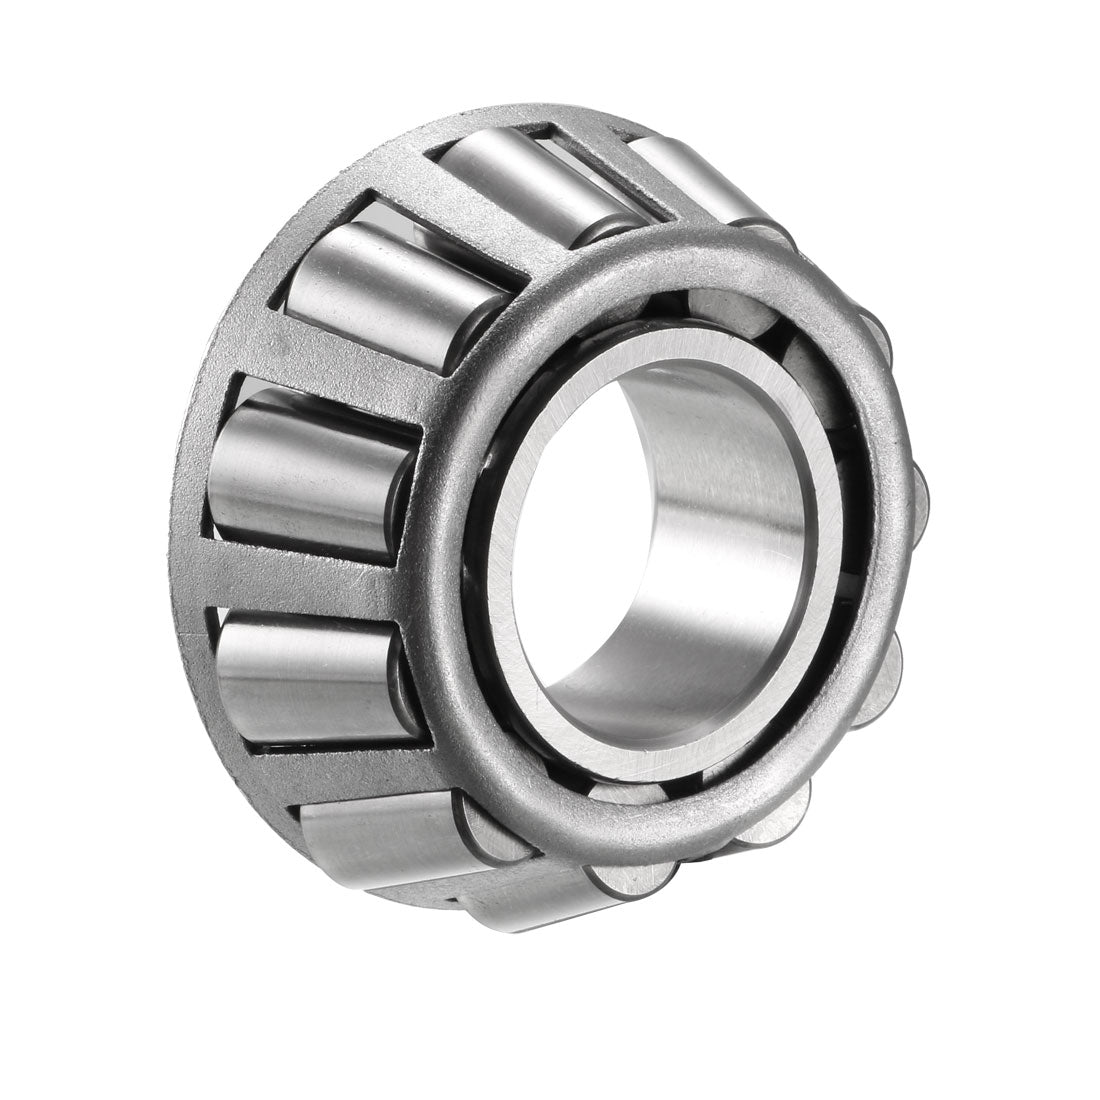 Uxcell Uxcell A4050 Tapered Roller Bearing Single Cone 0.5" Bore 0.4326" Width